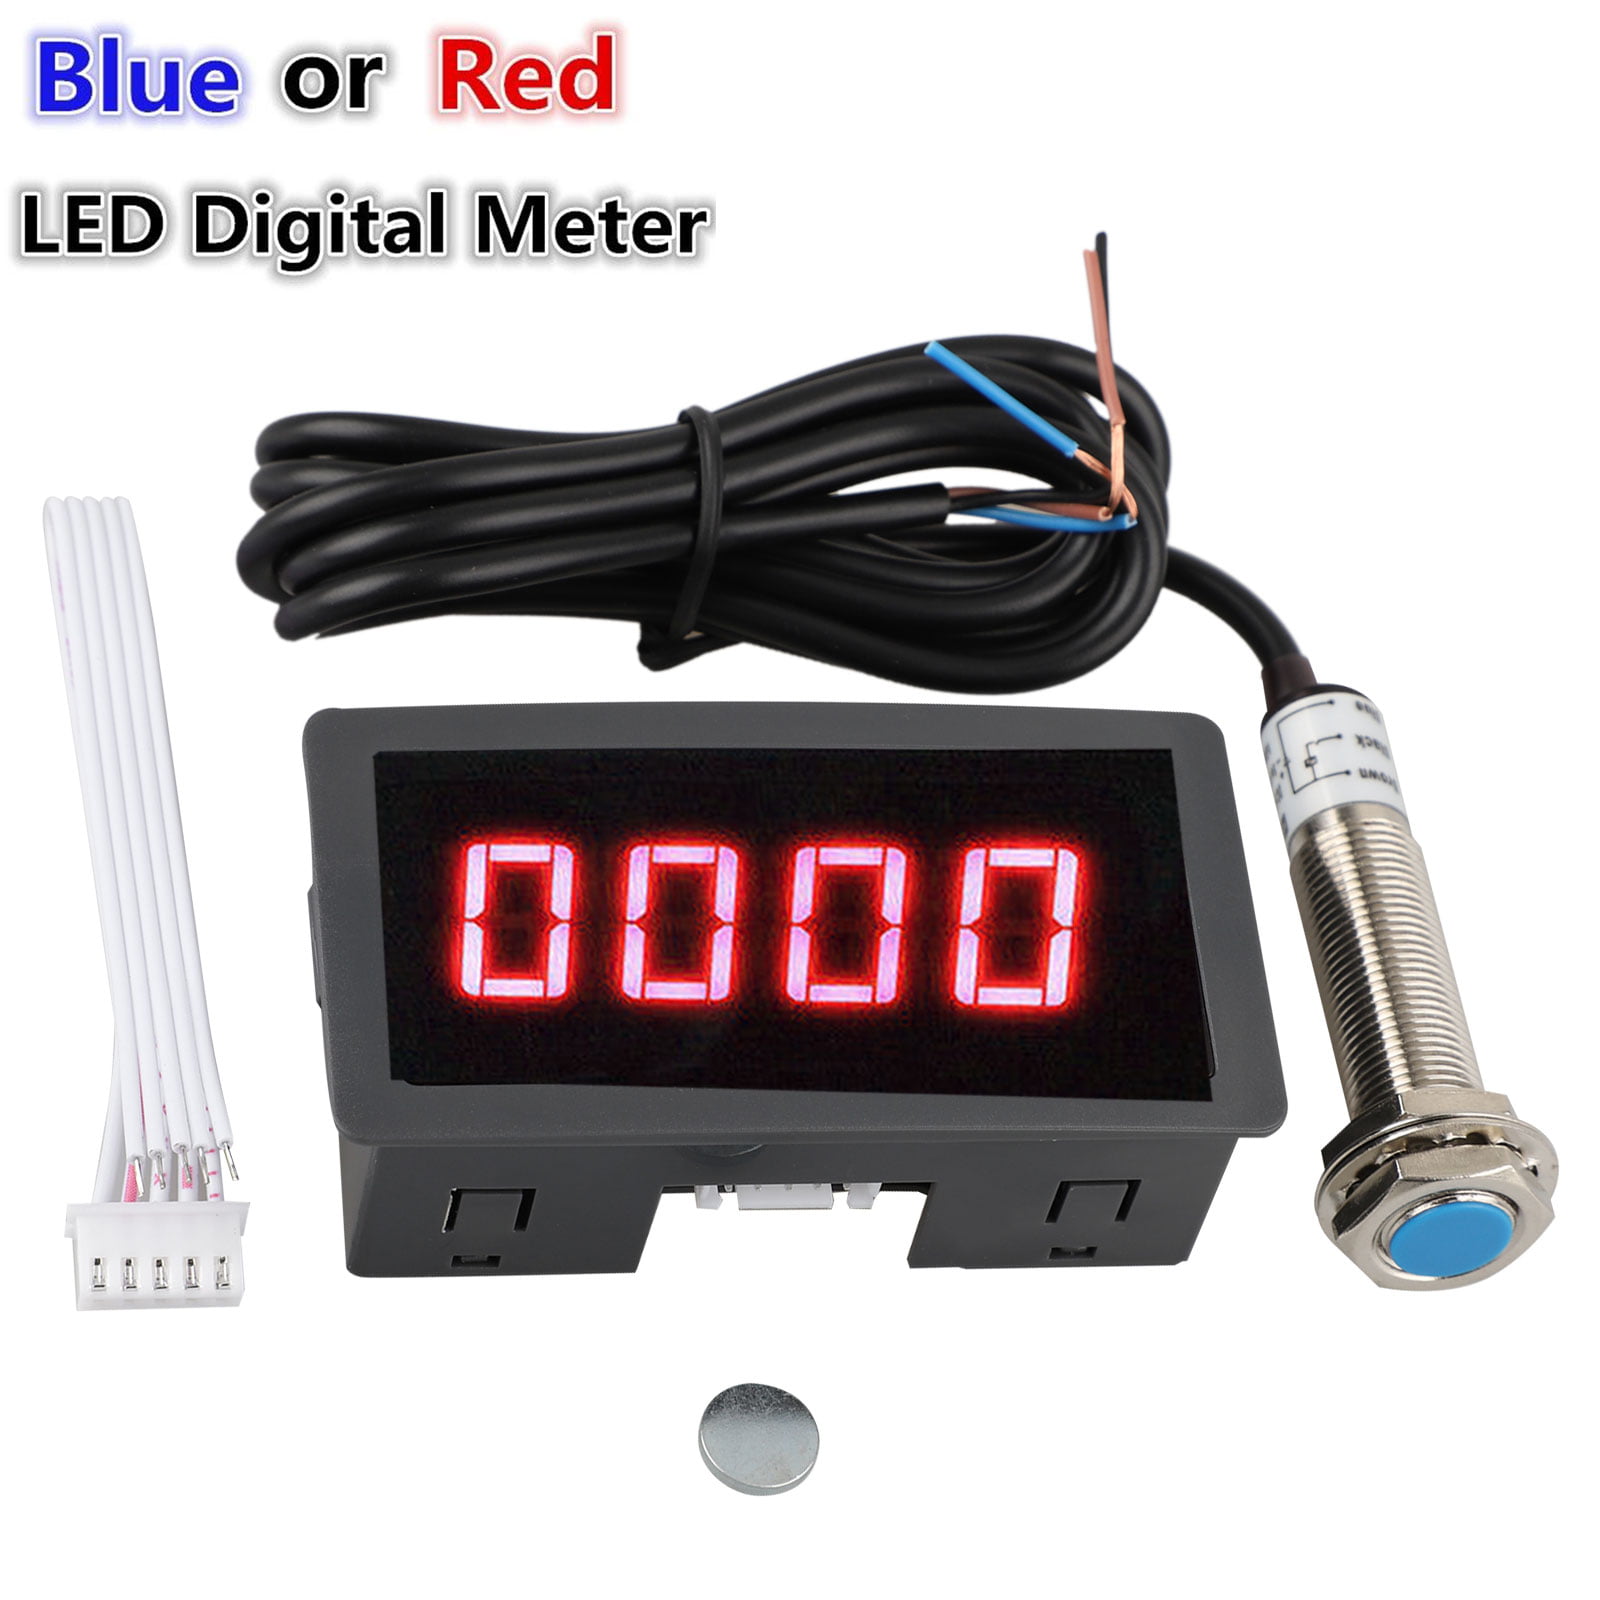 Red 4 Digital LED Display Tachometer RPM Speed Meter Panel Inductive Hall Effect Sensor NPN Proximity Switch Red// Blue